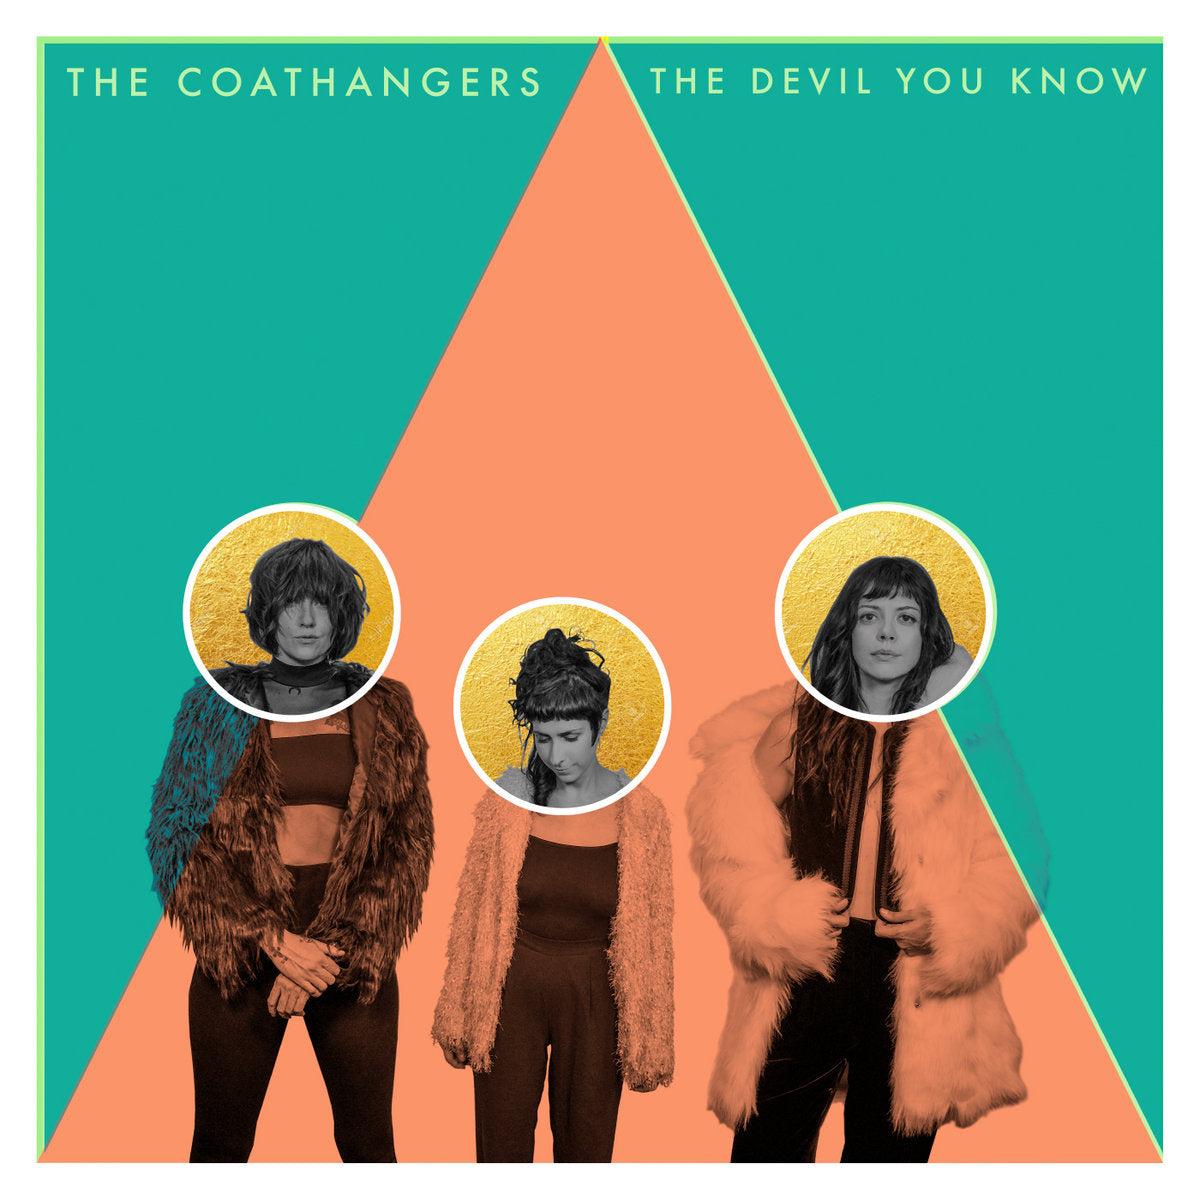 The Coathangers - The Devil You Know LP (Kelly Green White Splatter Vinyl Edition)